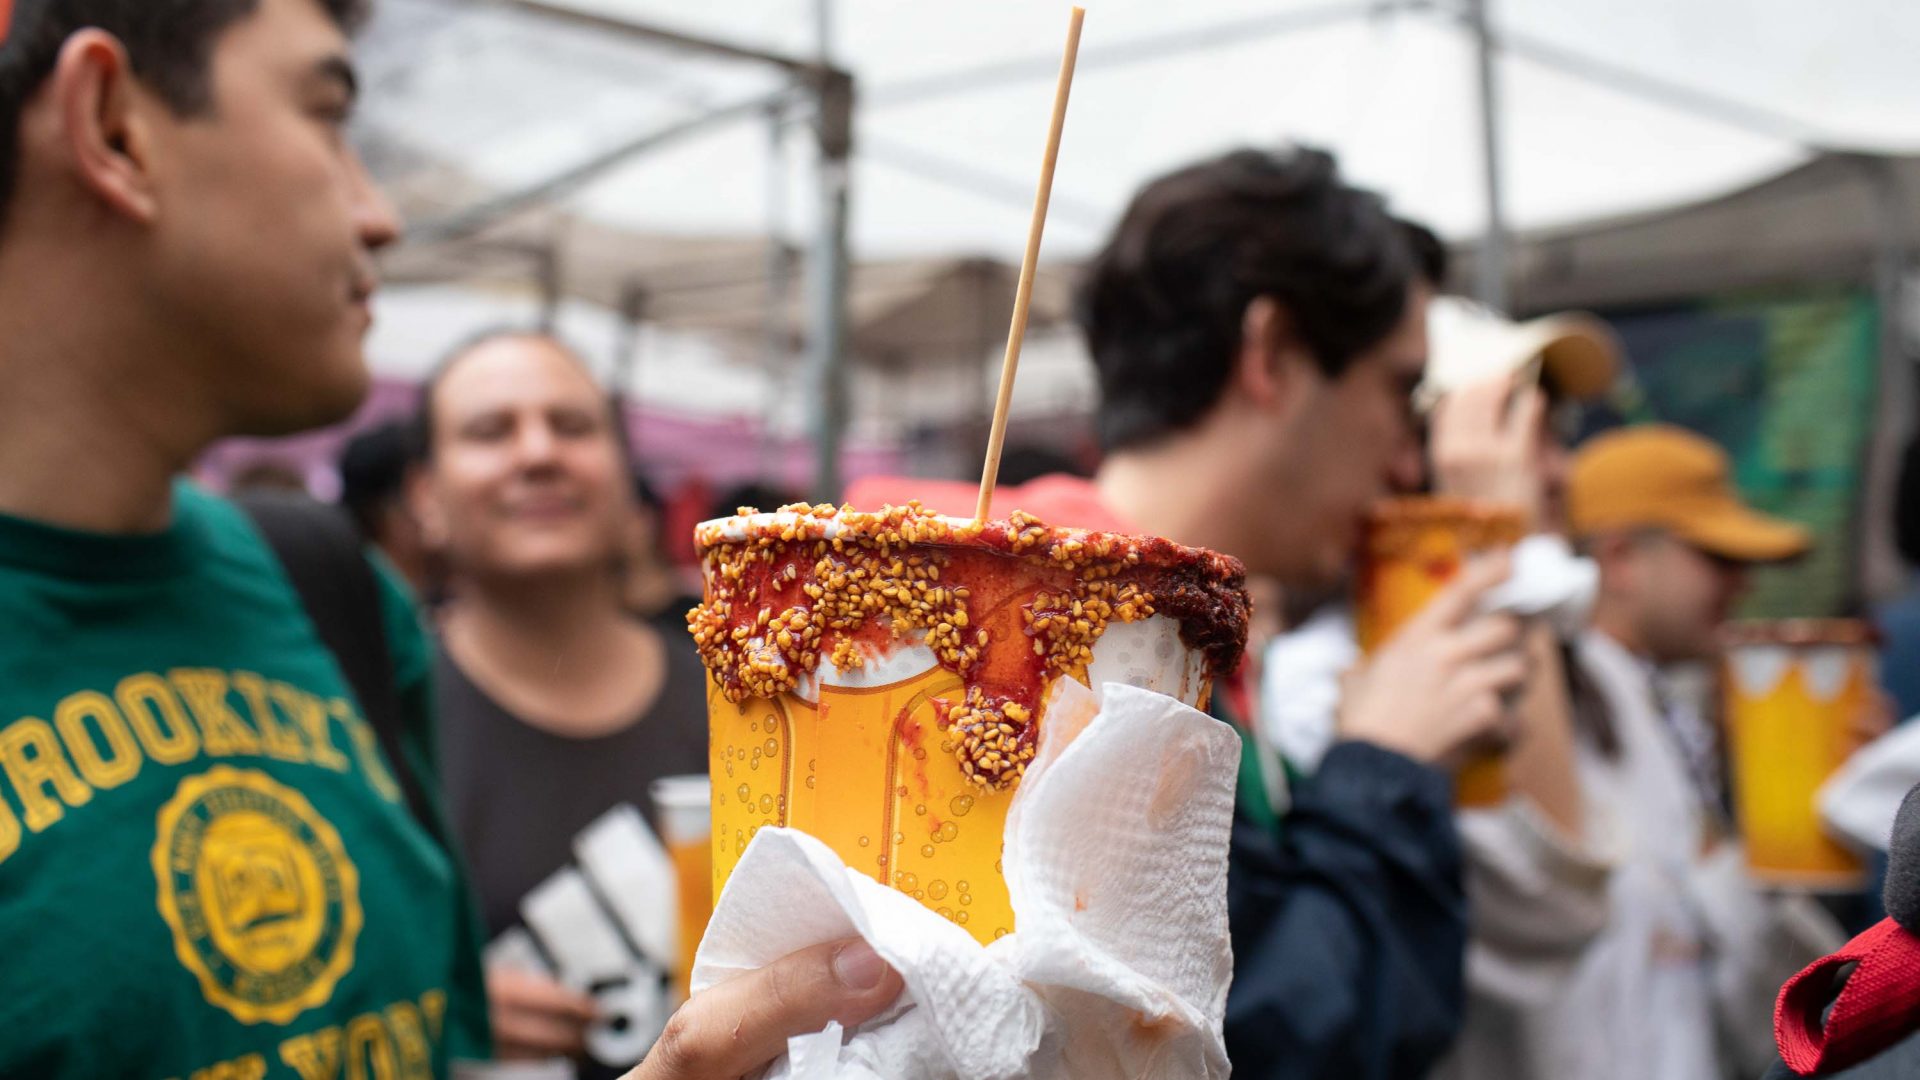 A person holds a michelada cup in a crowd of people.